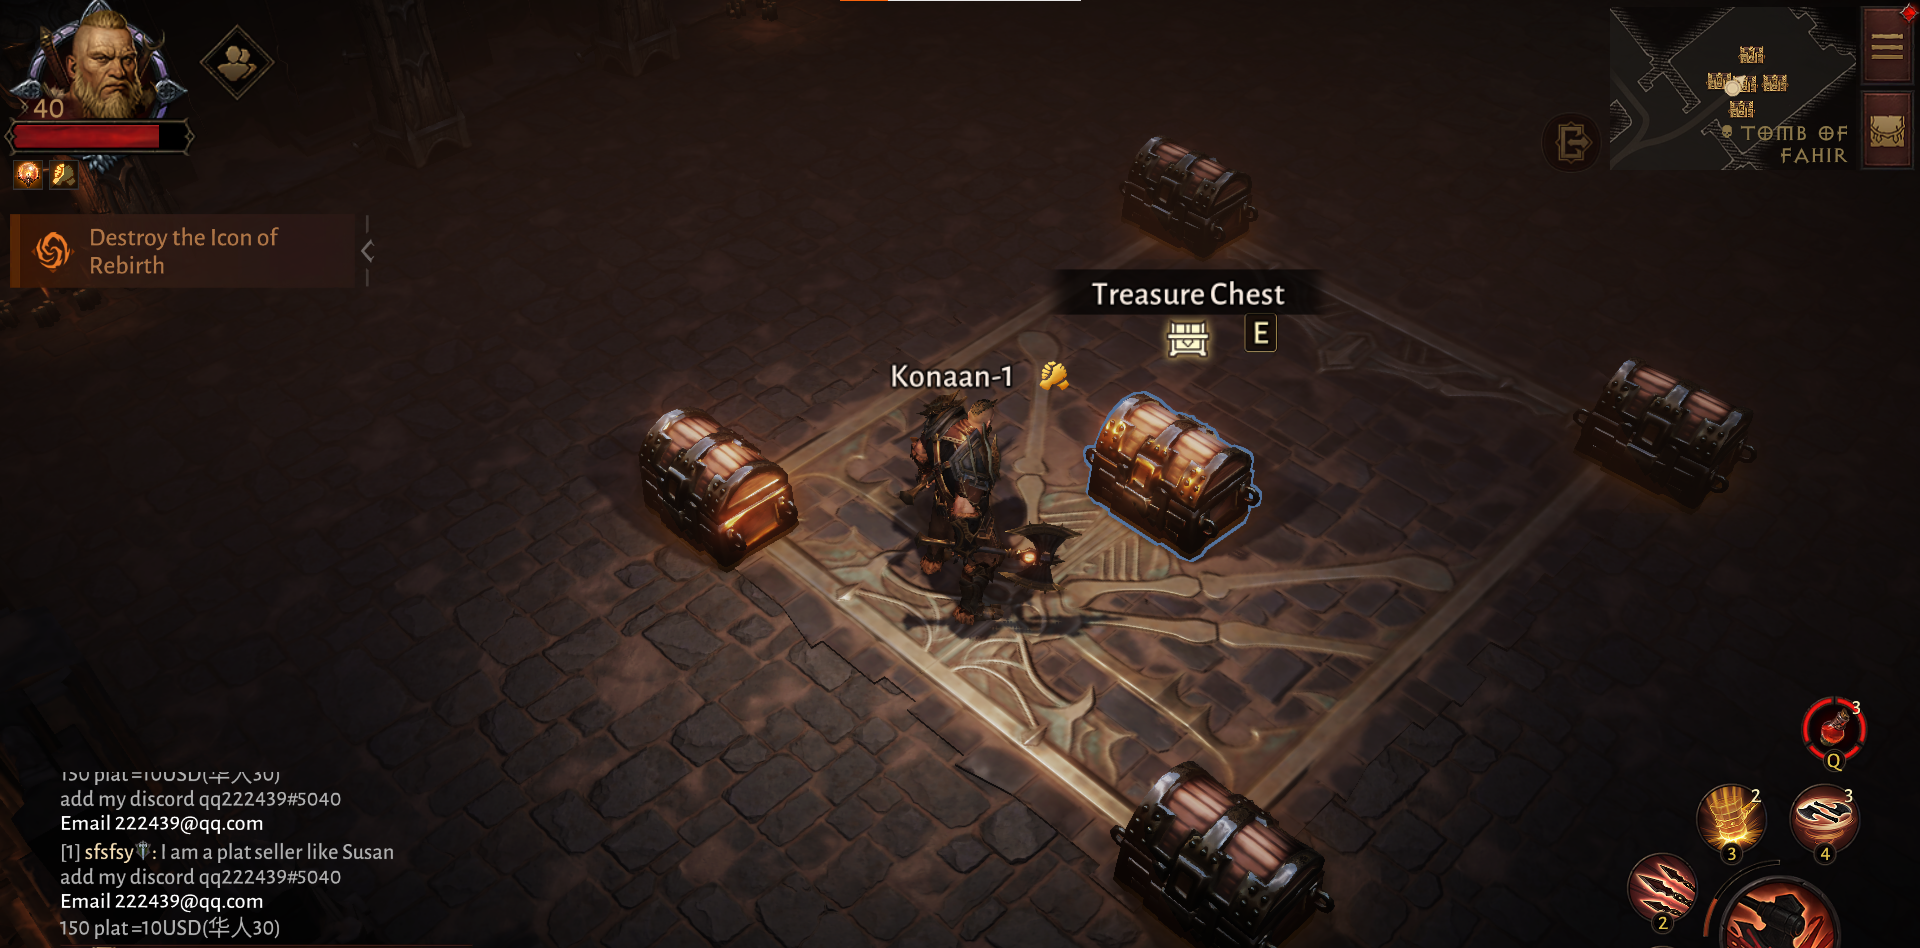 Tomb of Fahir is one of the best places to farm Legendary Gear in Diablo Immortal. 